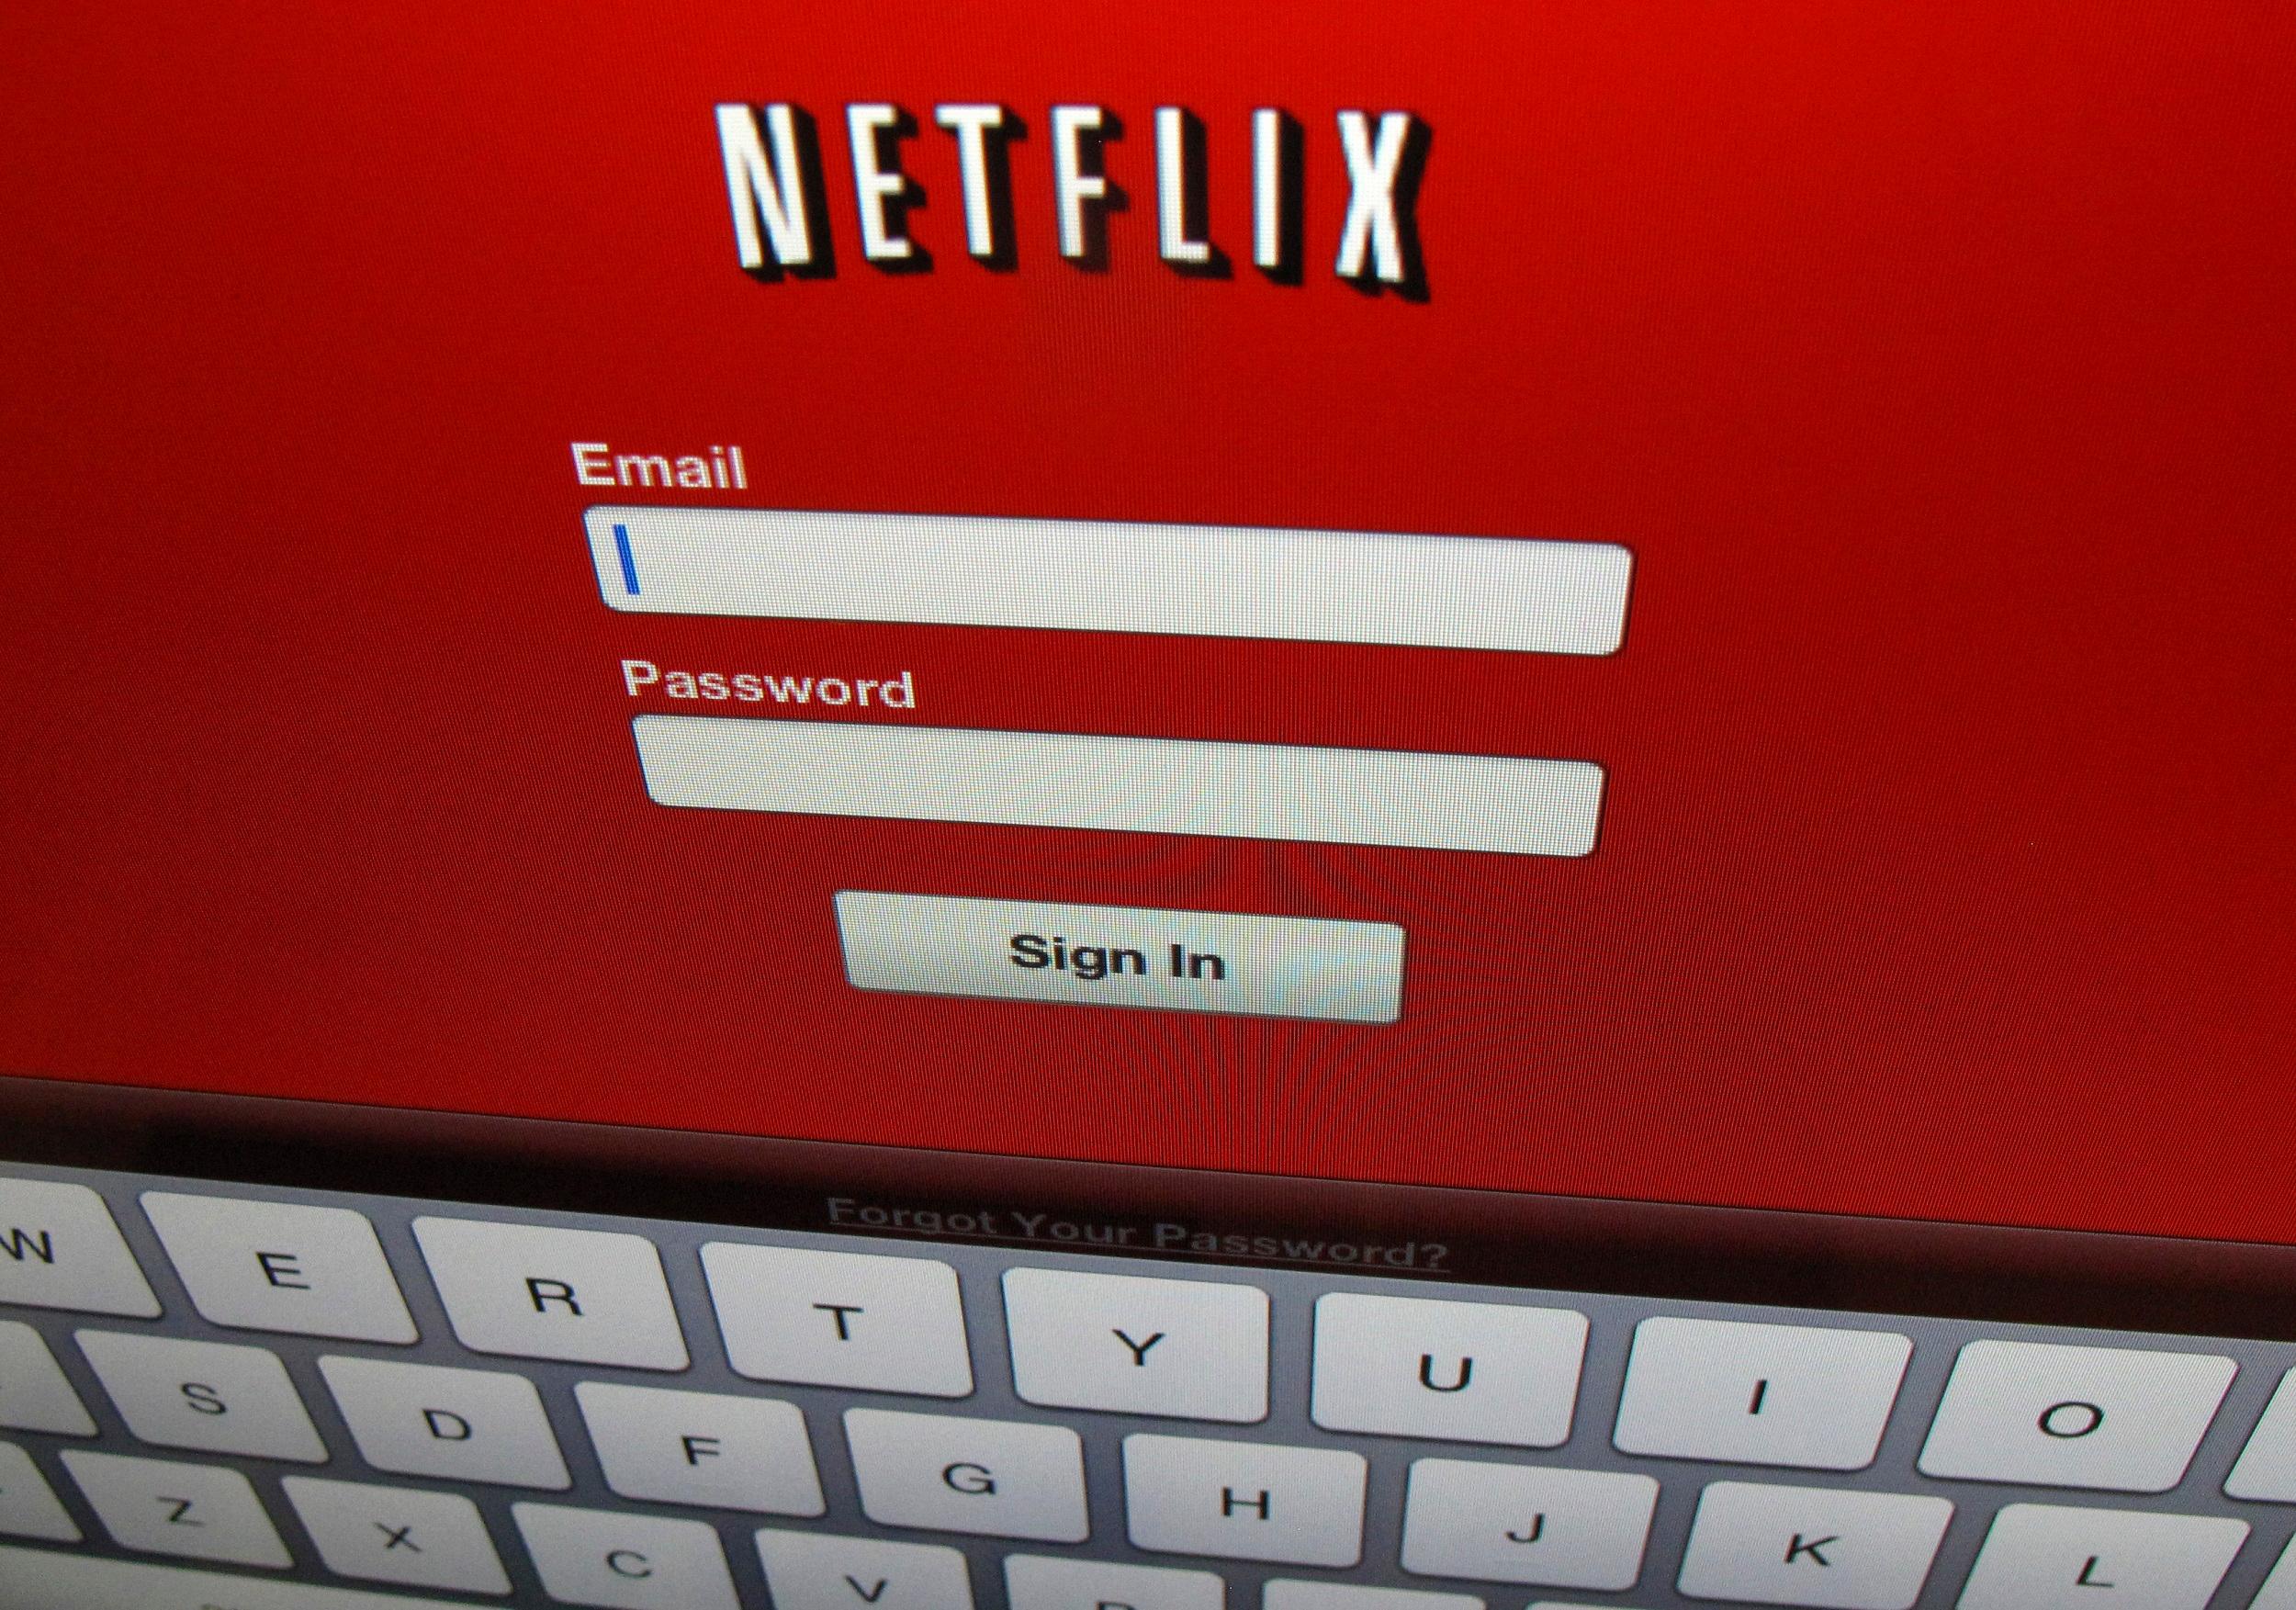 Tennessee: It is a crime to share your Netflix password.